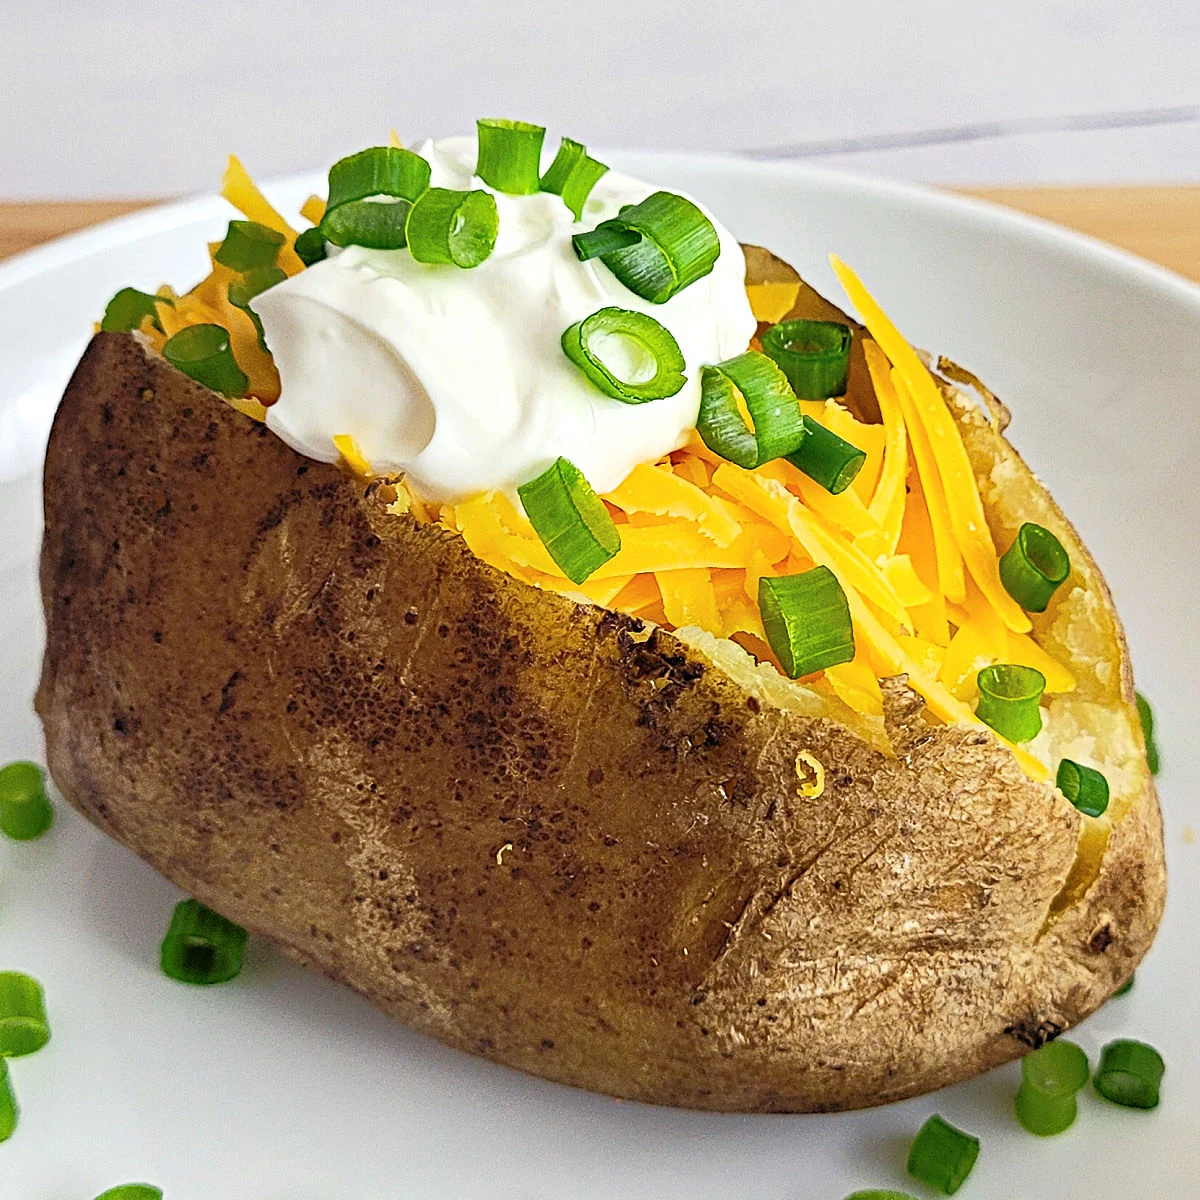 Baked potato topped with cheddar cheese, sour cream and sliced green onions.